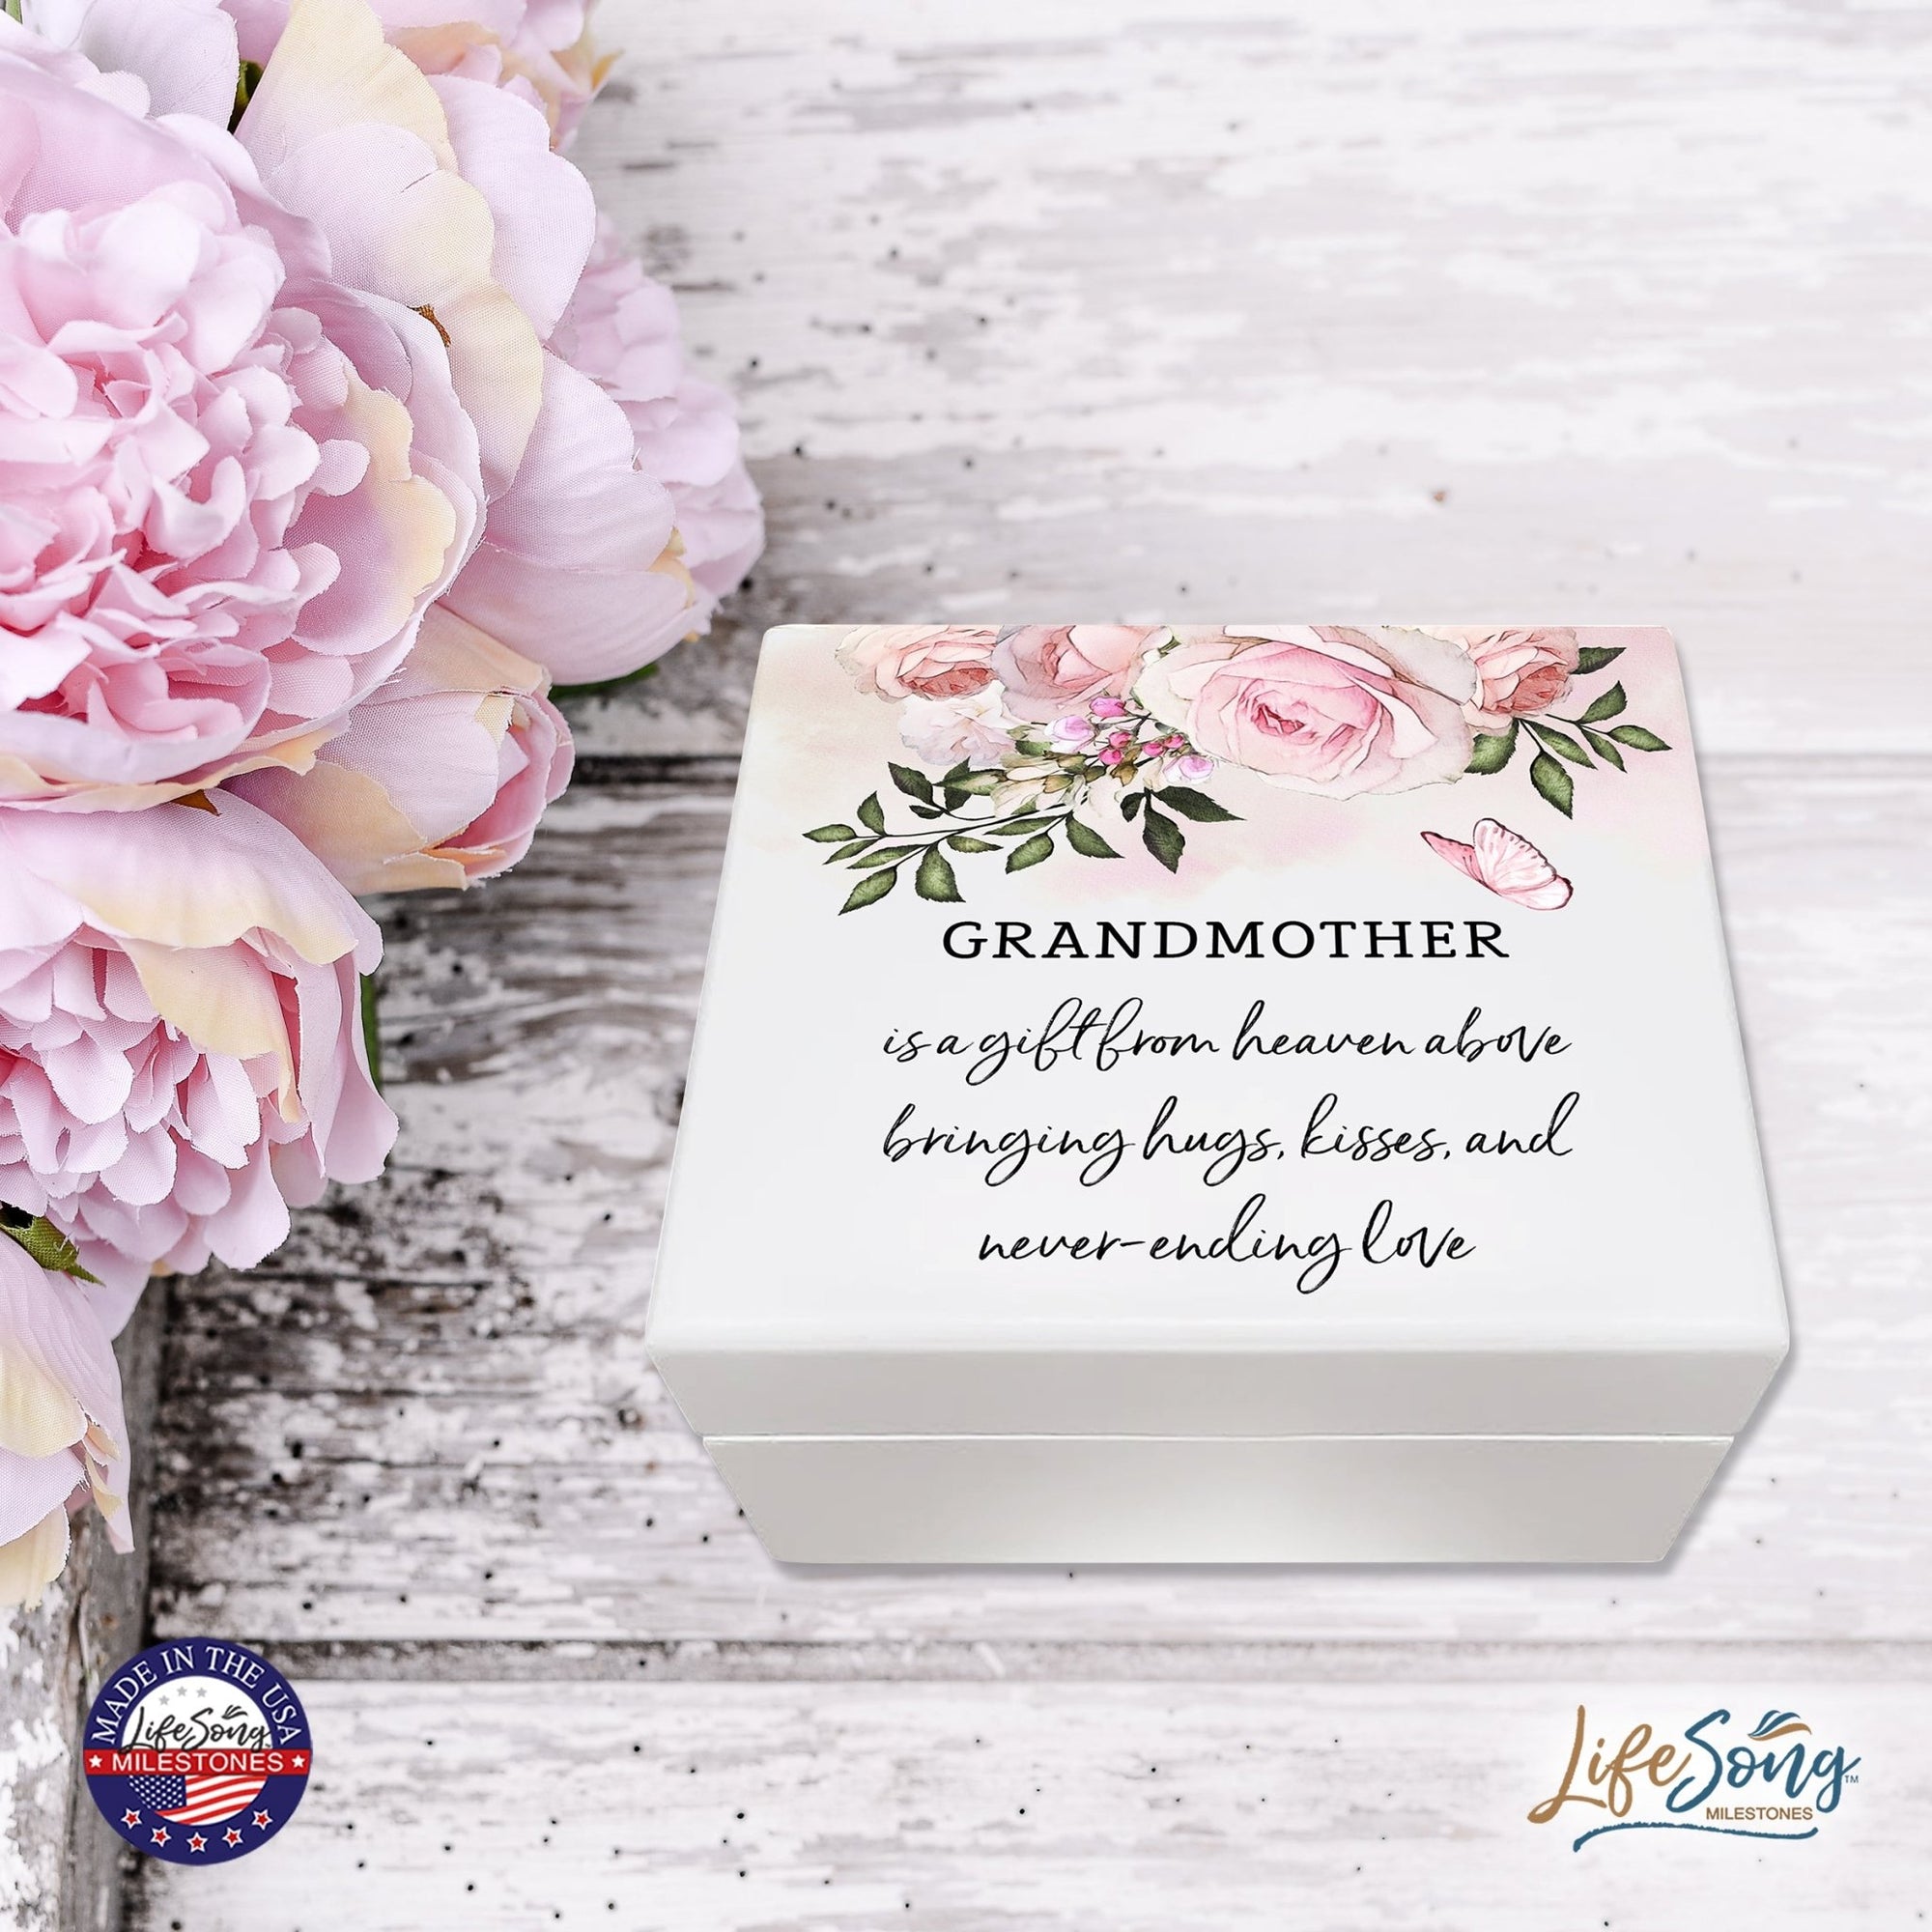 Jewelry Keepsake Box for Grandmother 6x5.5in - Grandmother, A Gift From Abovd - LifeSong Milestones